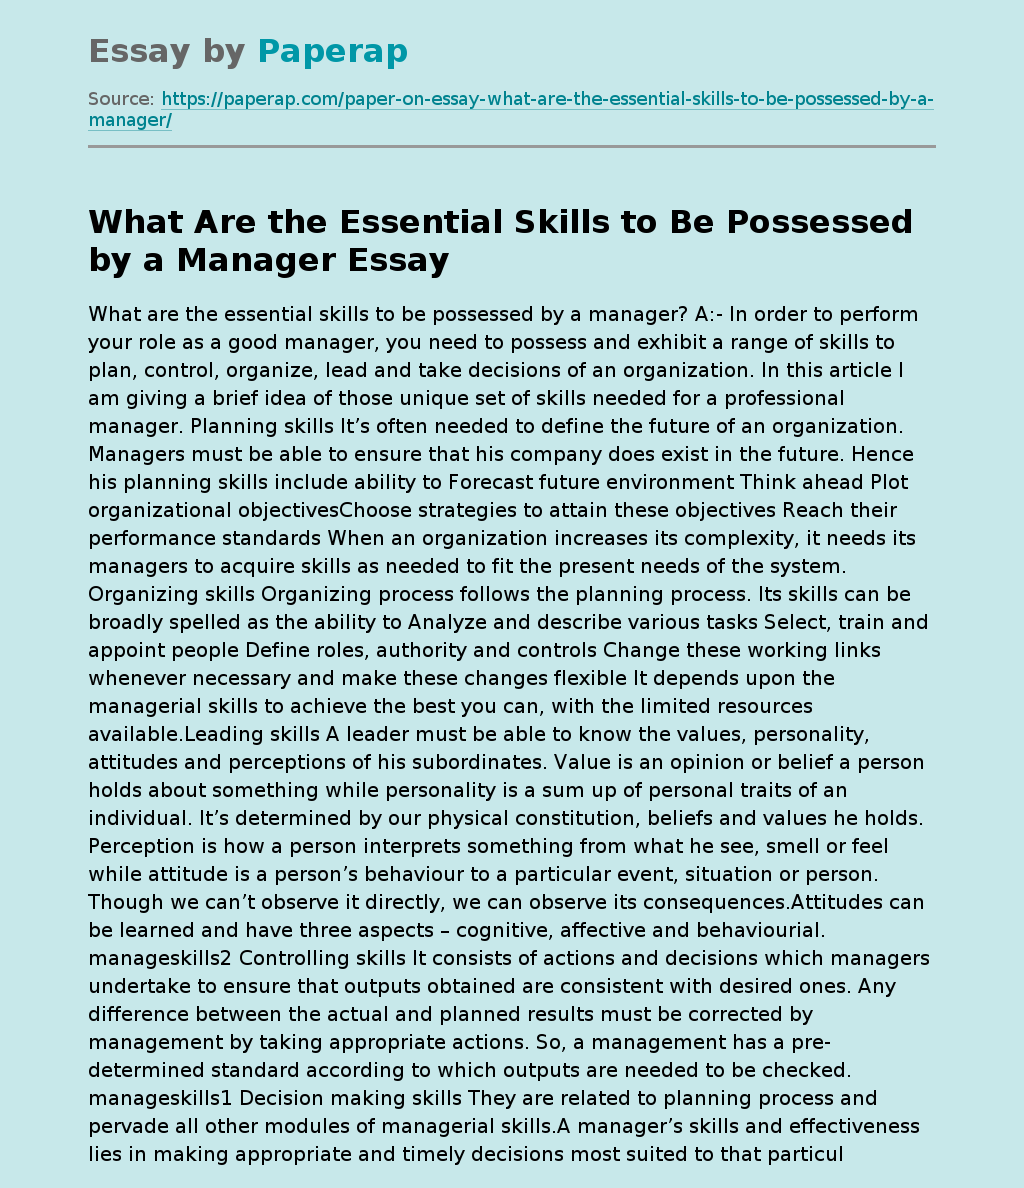 What Are the Essential Skills to Be Possessed by a Manager